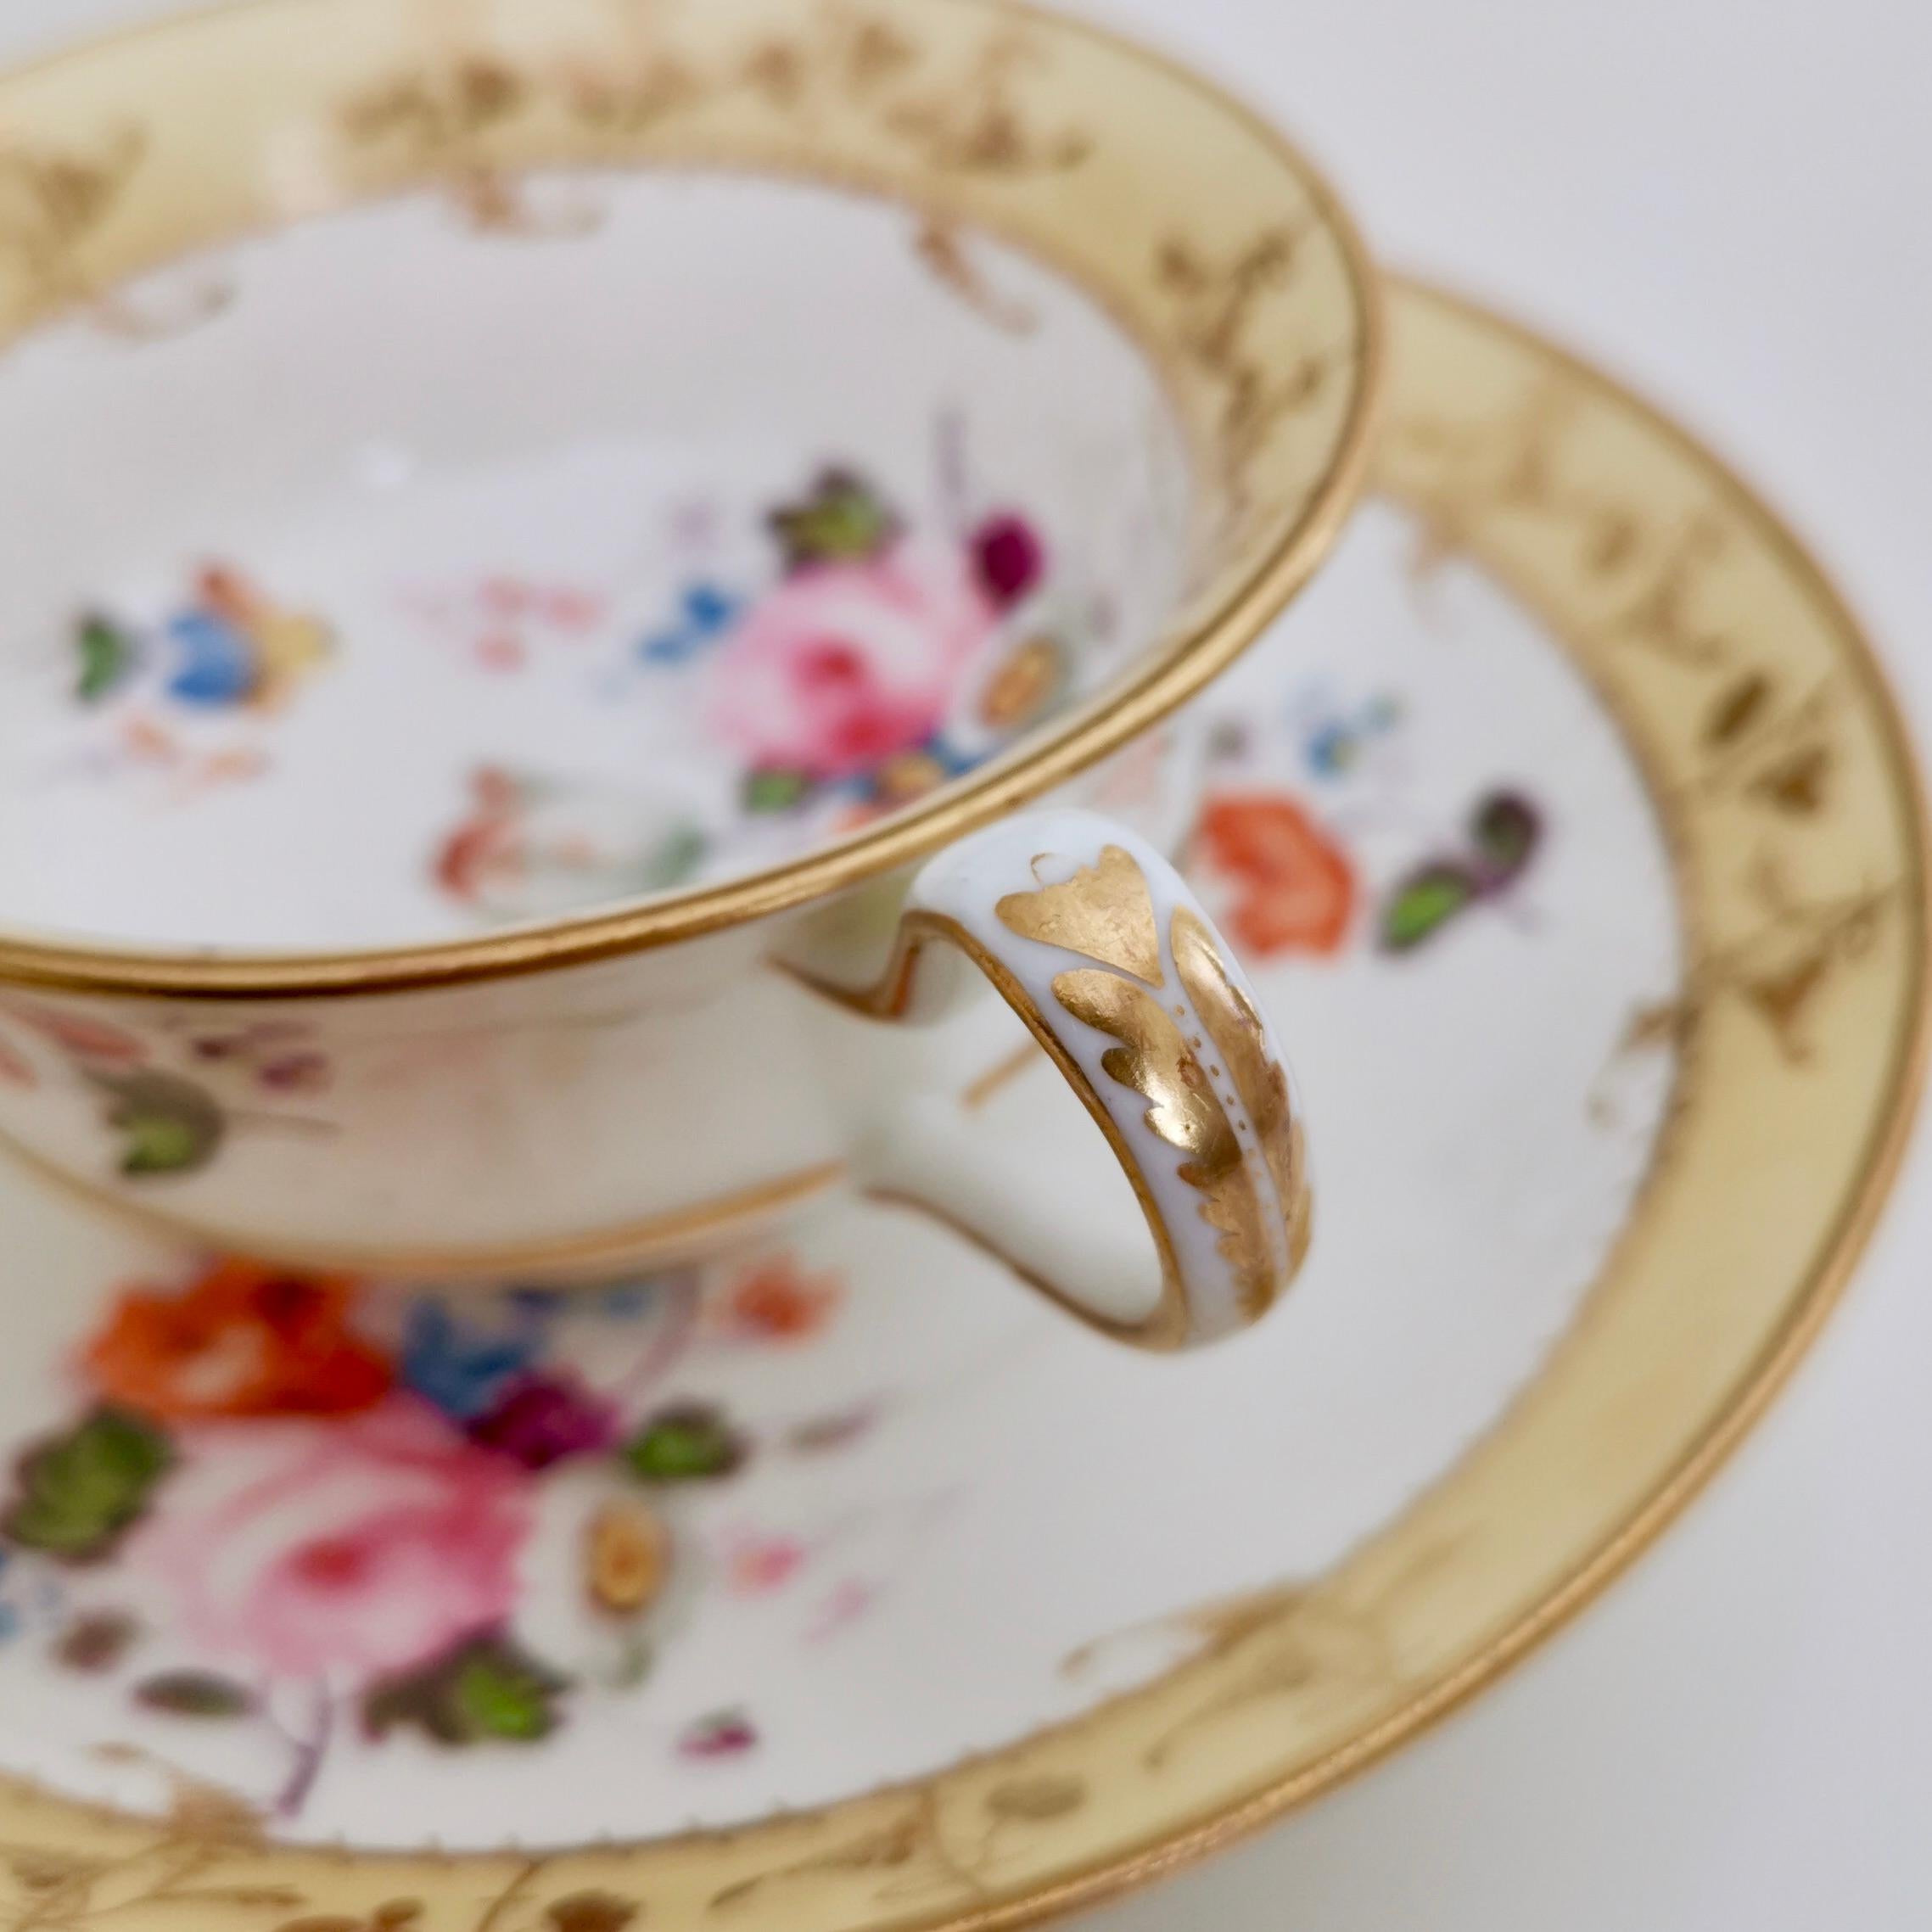 Early 19th Century Minton Porcelain Teacup, Yellow with Hand Painted Flowers, Regency, circa 1825